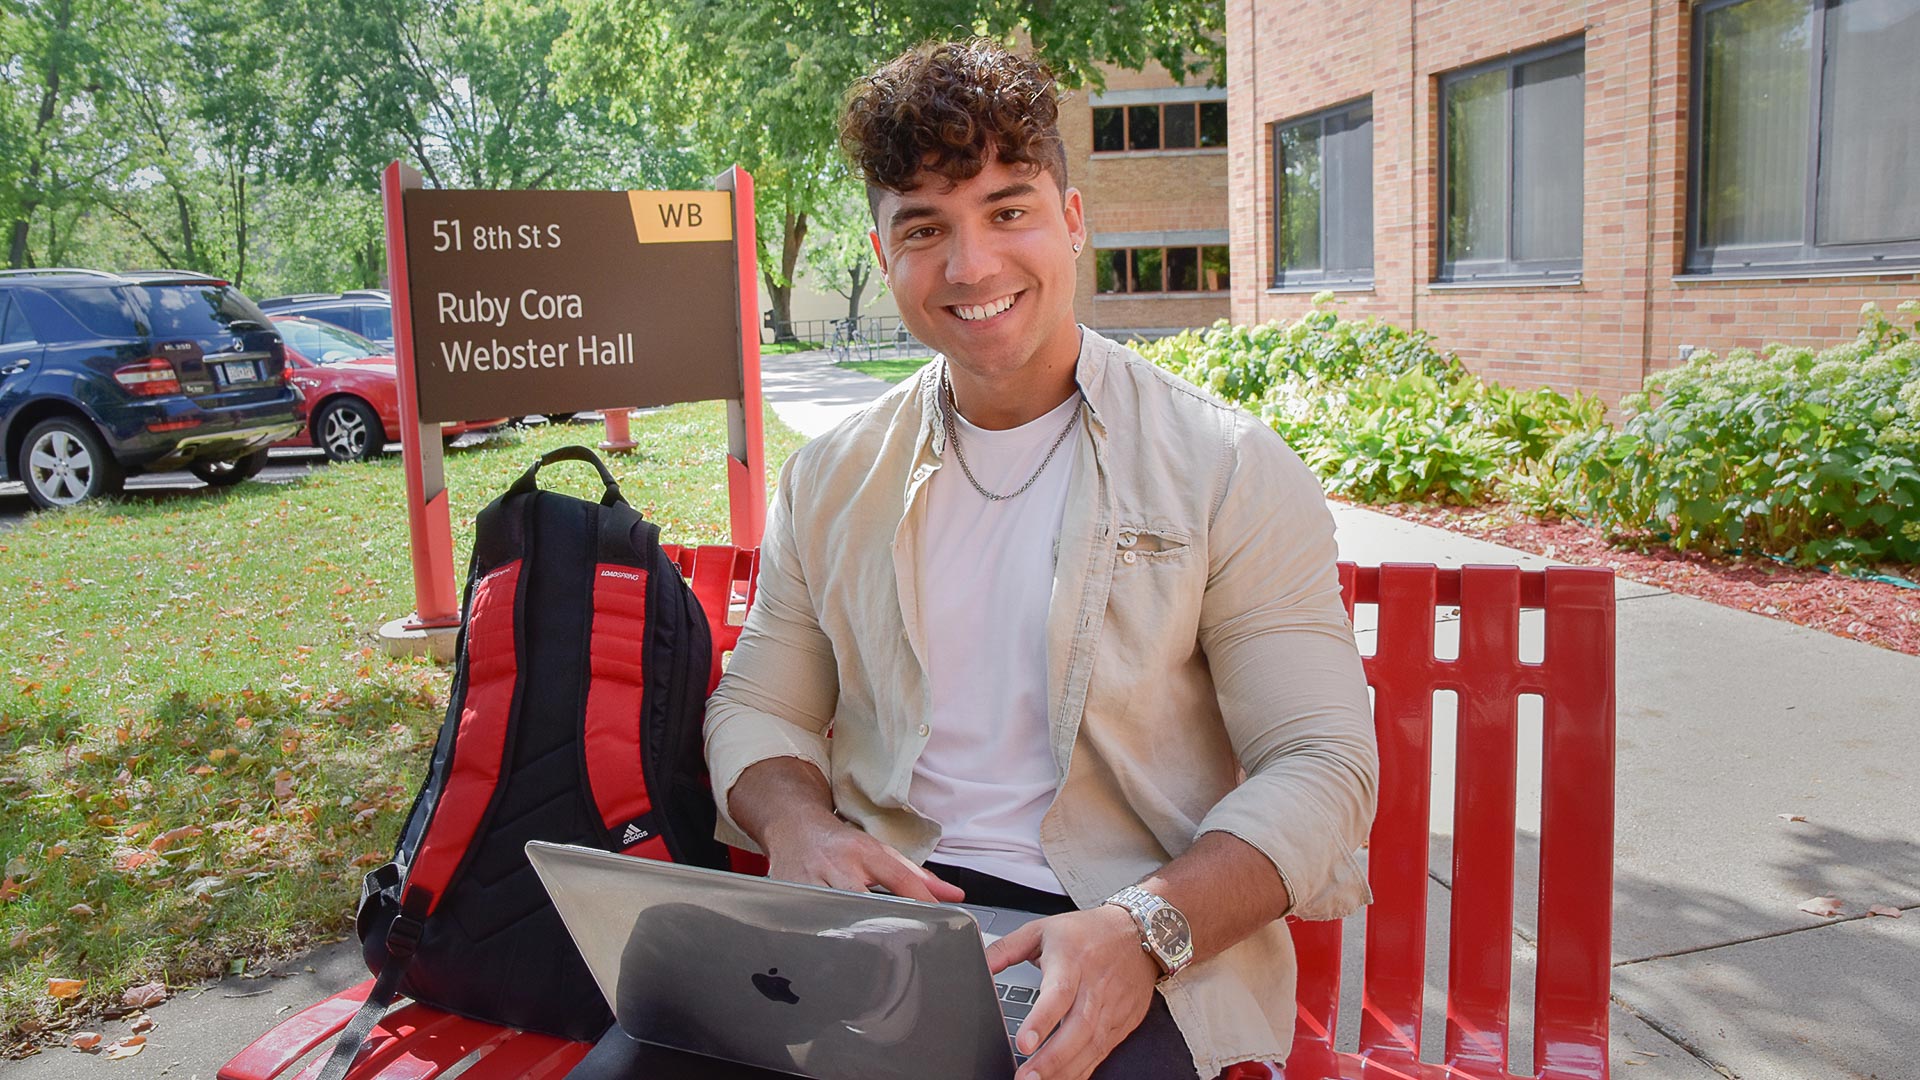 Student on bench with computer